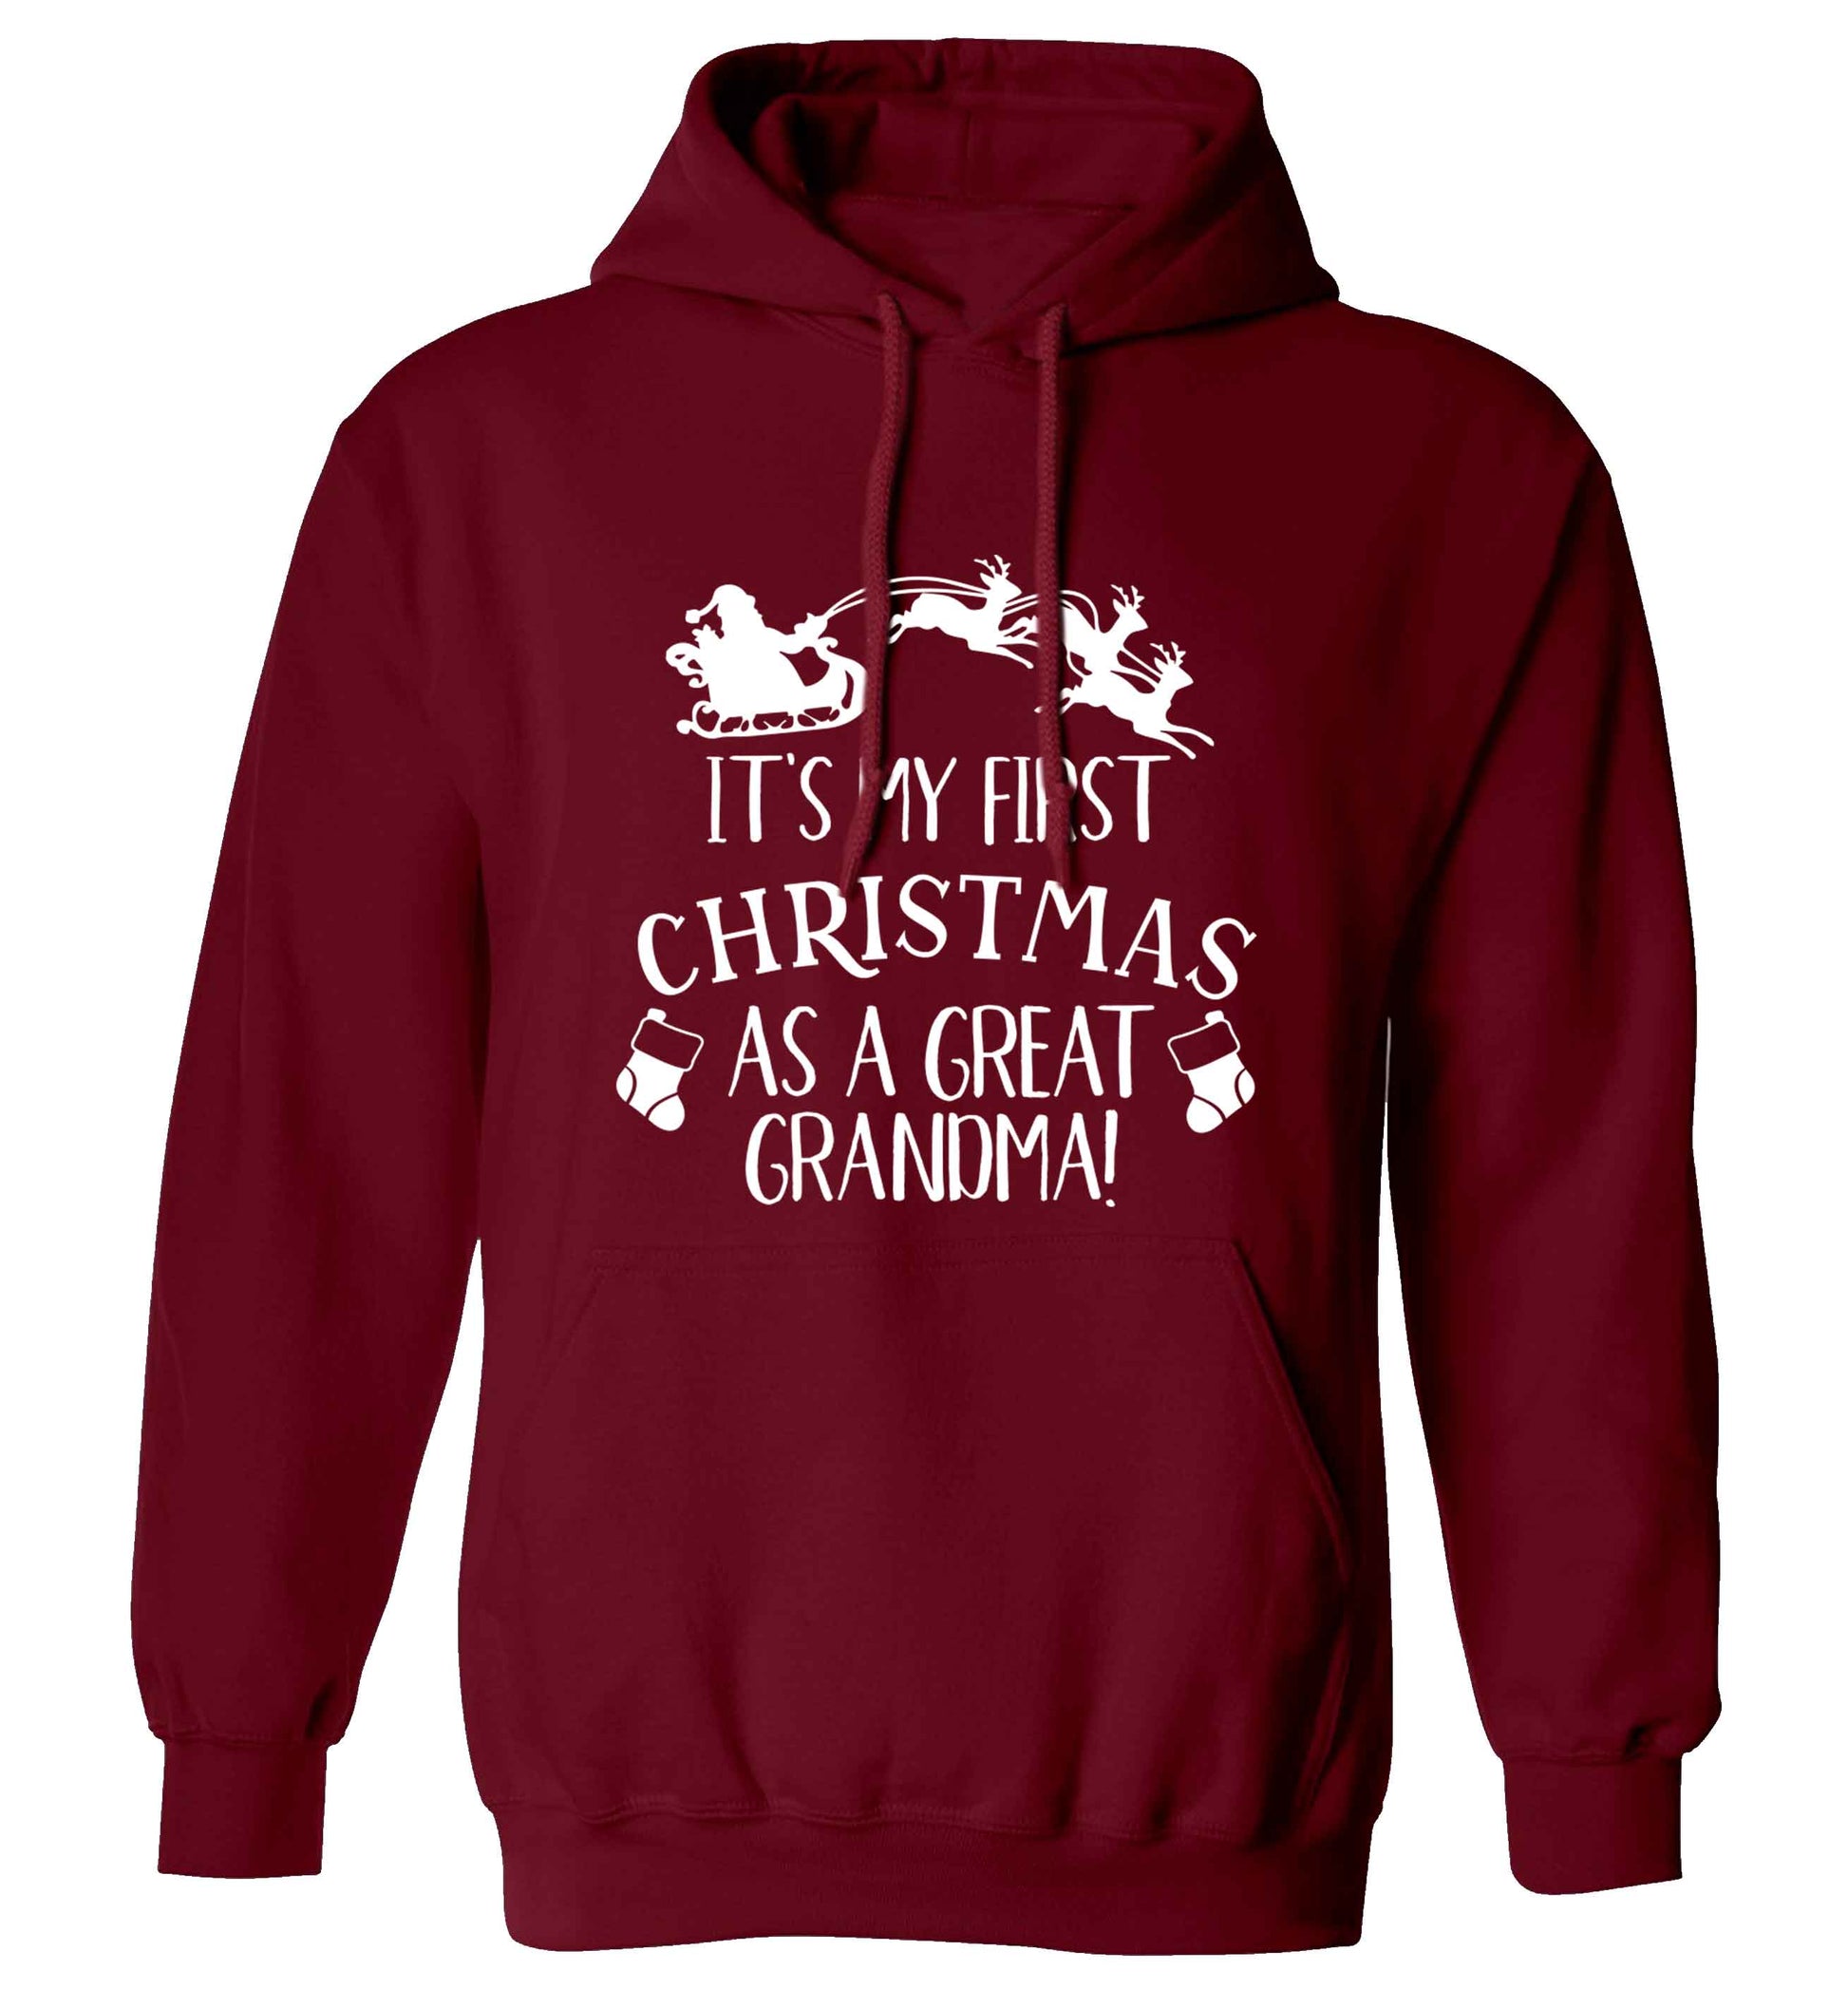 It's my first Christmas as a great grandma! adults unisex maroon hoodie 2XL